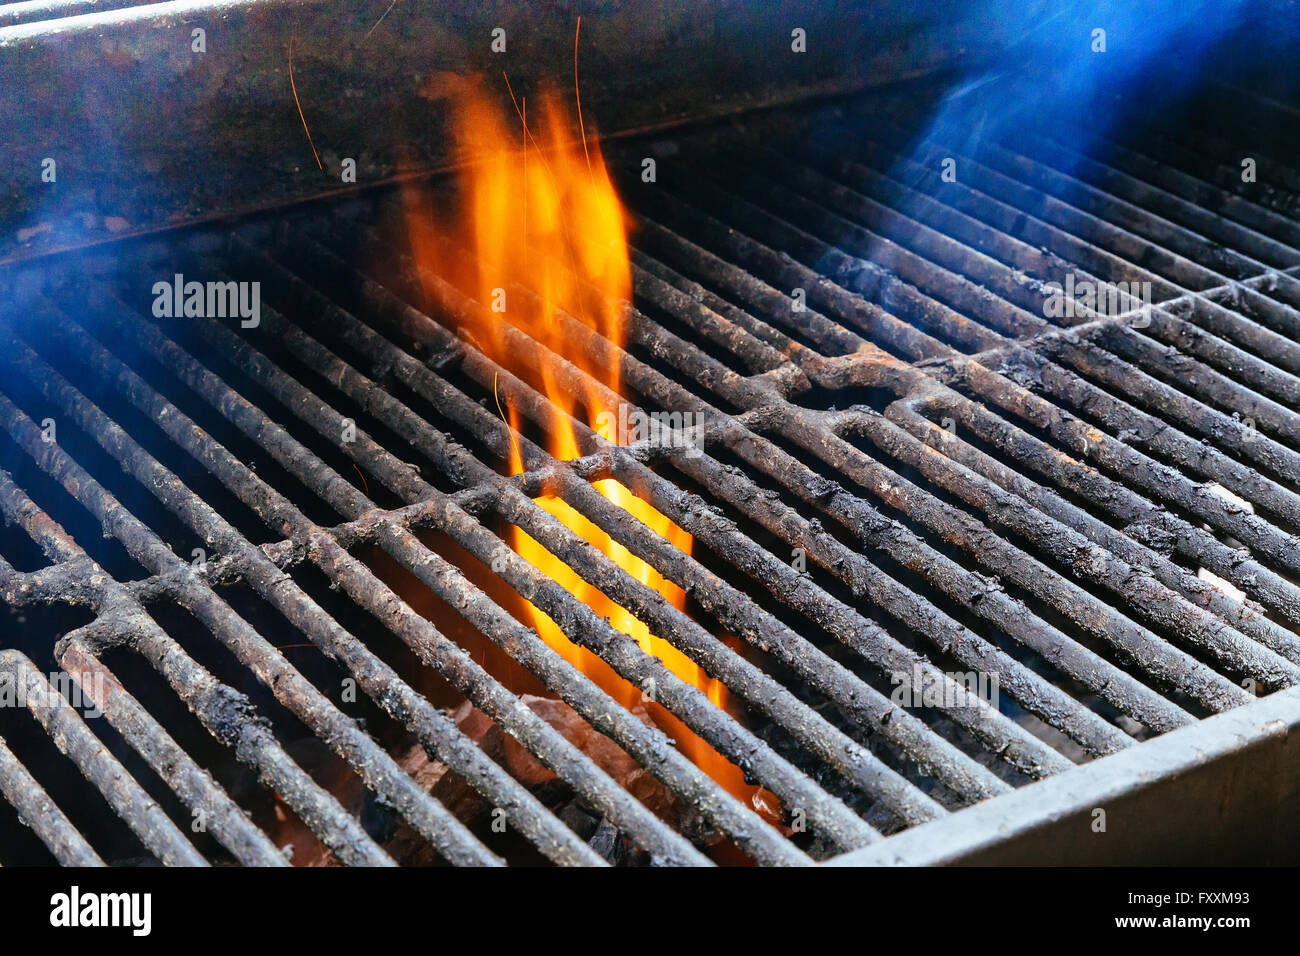 BBQ Grill and glowing coals. You can see more BBQ, grilled food, fire Stock Photo